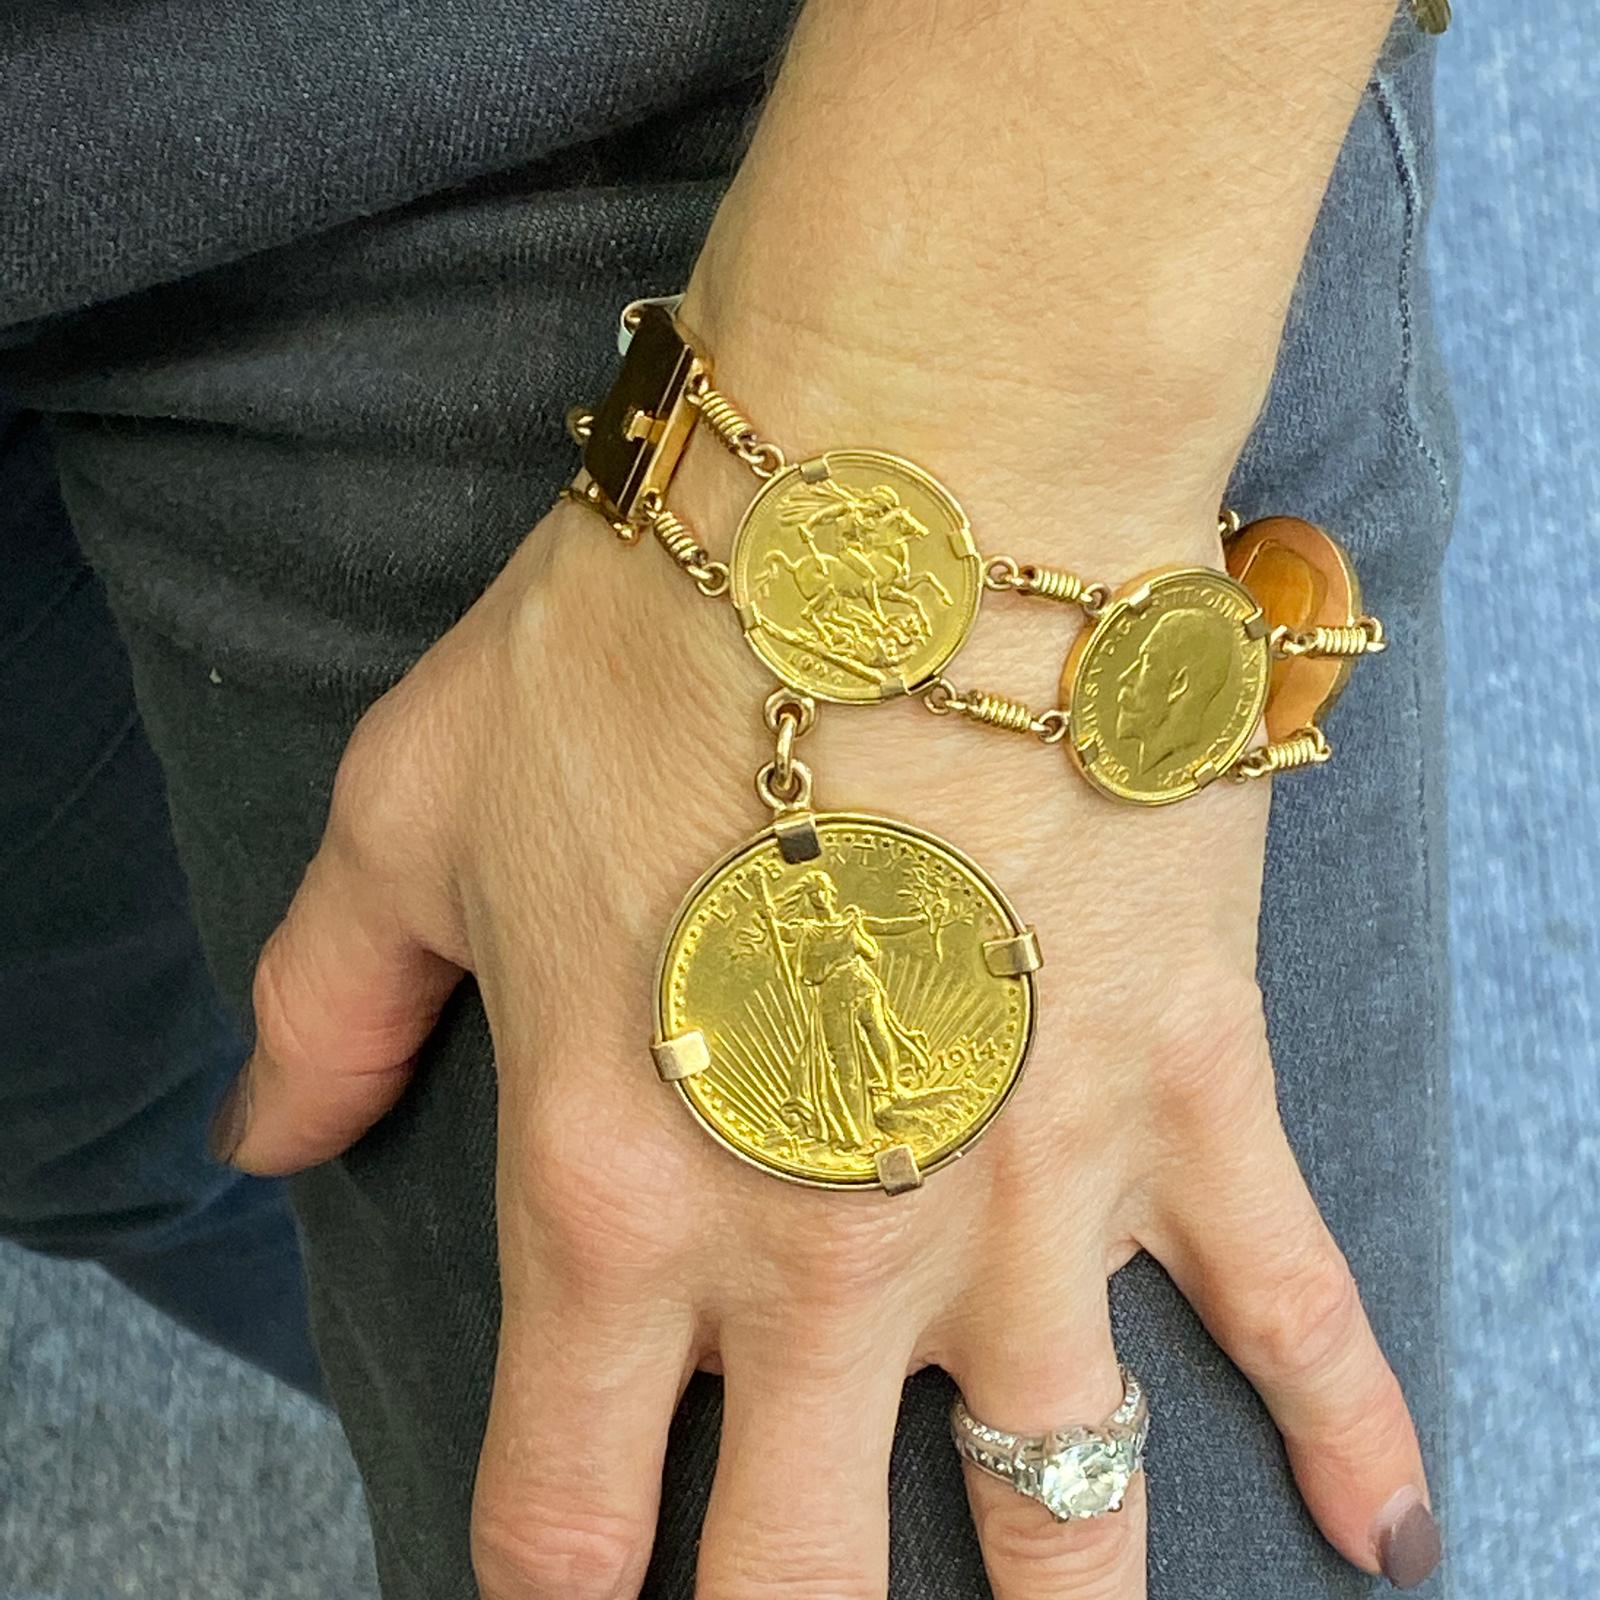 Fabulous vintage coin bracelet fashioned in 18 karat yellow gold frames and links. The bracelet features a Lady Liberty $20 US gold coin and 5 English Sovereign Gold coins. The coins are 90% gold. The bracelet measures 8.0 inches in length. 